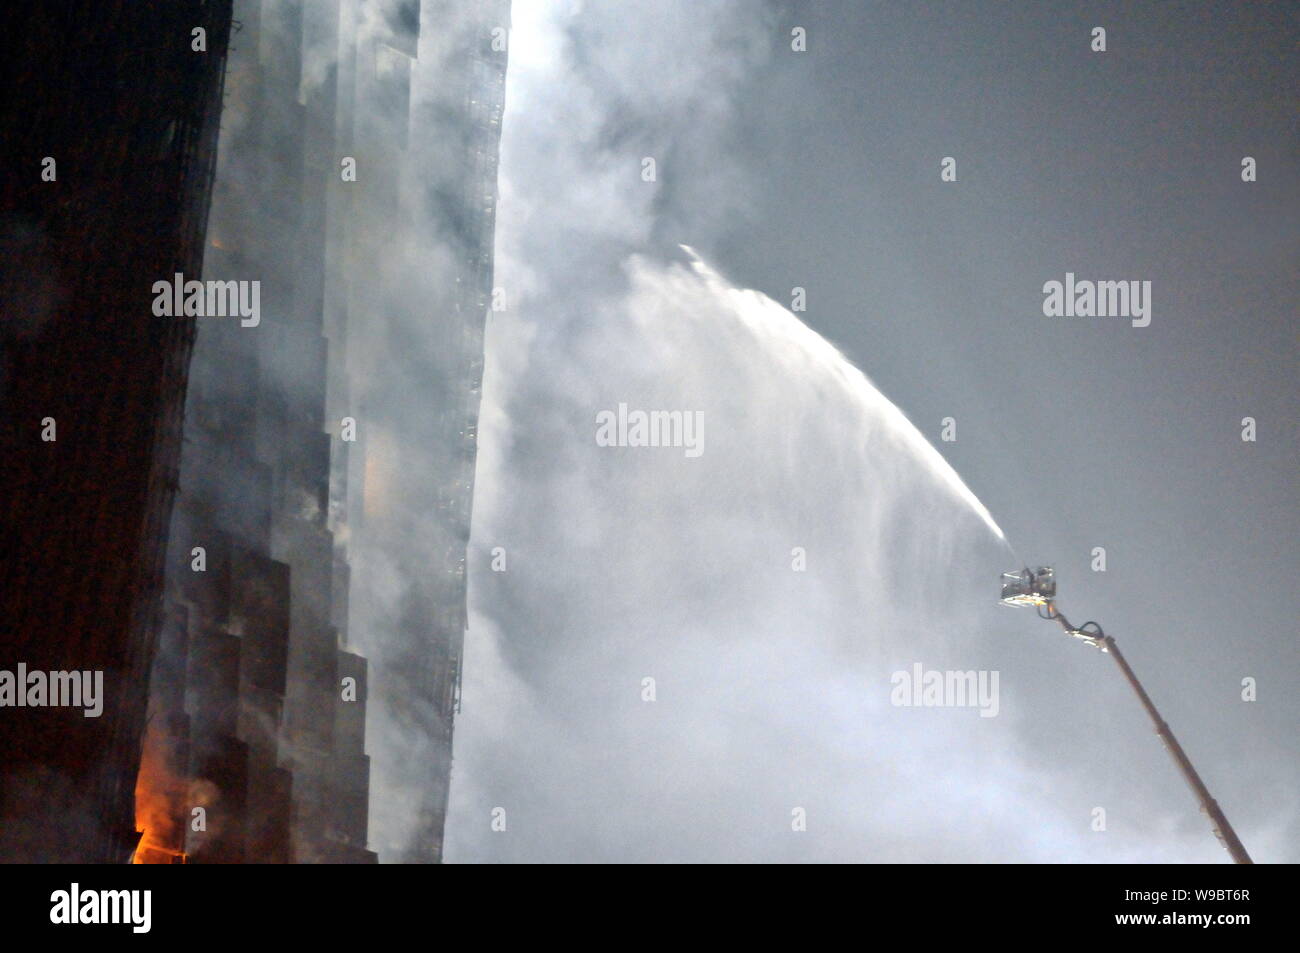 Fire fighters try to extinguish the fire in the Mandarin Oriental Hotel building near the new CCTV Tower during the Lantern Festival in Beijing, China Stock Photo